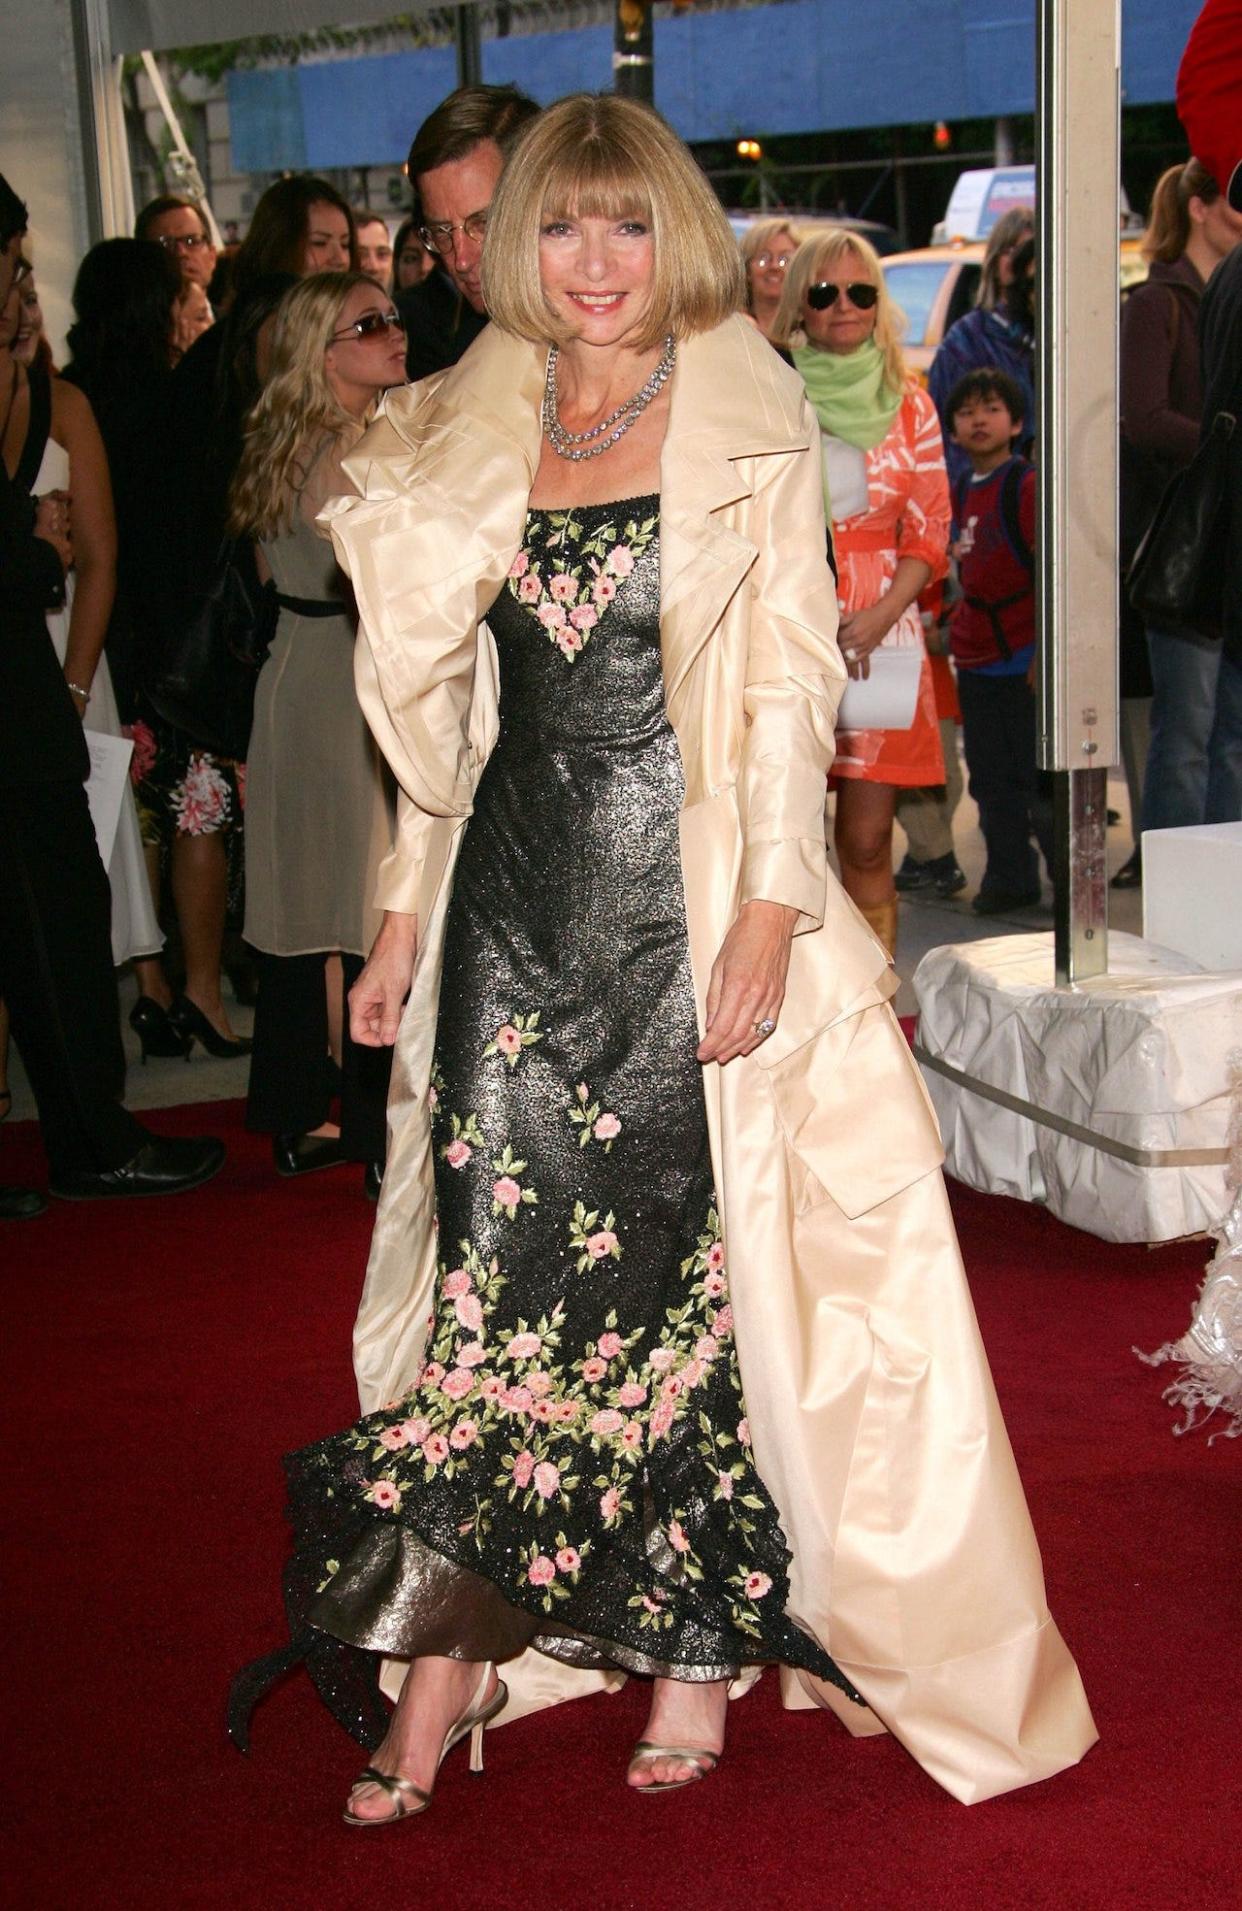 Anna Wintour at the 2006 Met Gala.